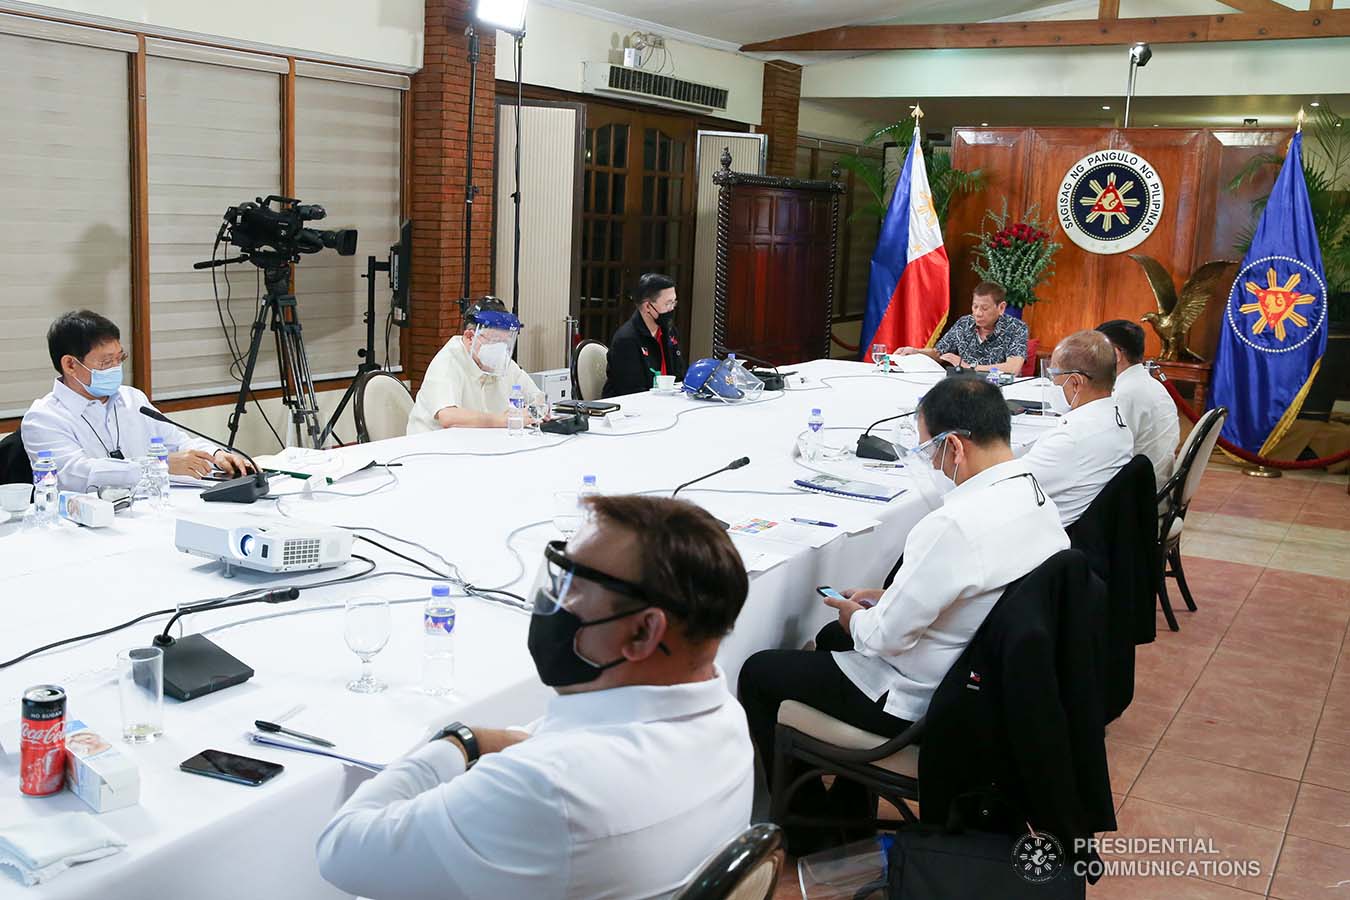 President Rodrigo Roa Duterte holds a meeting with the Inter-Agency Task Force on the Emerging Infectious Diseases (IATF-EID) core members at the Malago Clubhouse in Malacañang on June 30, 2020. ALBERT ALCAIN/PRESIDENTIAL PHOTO